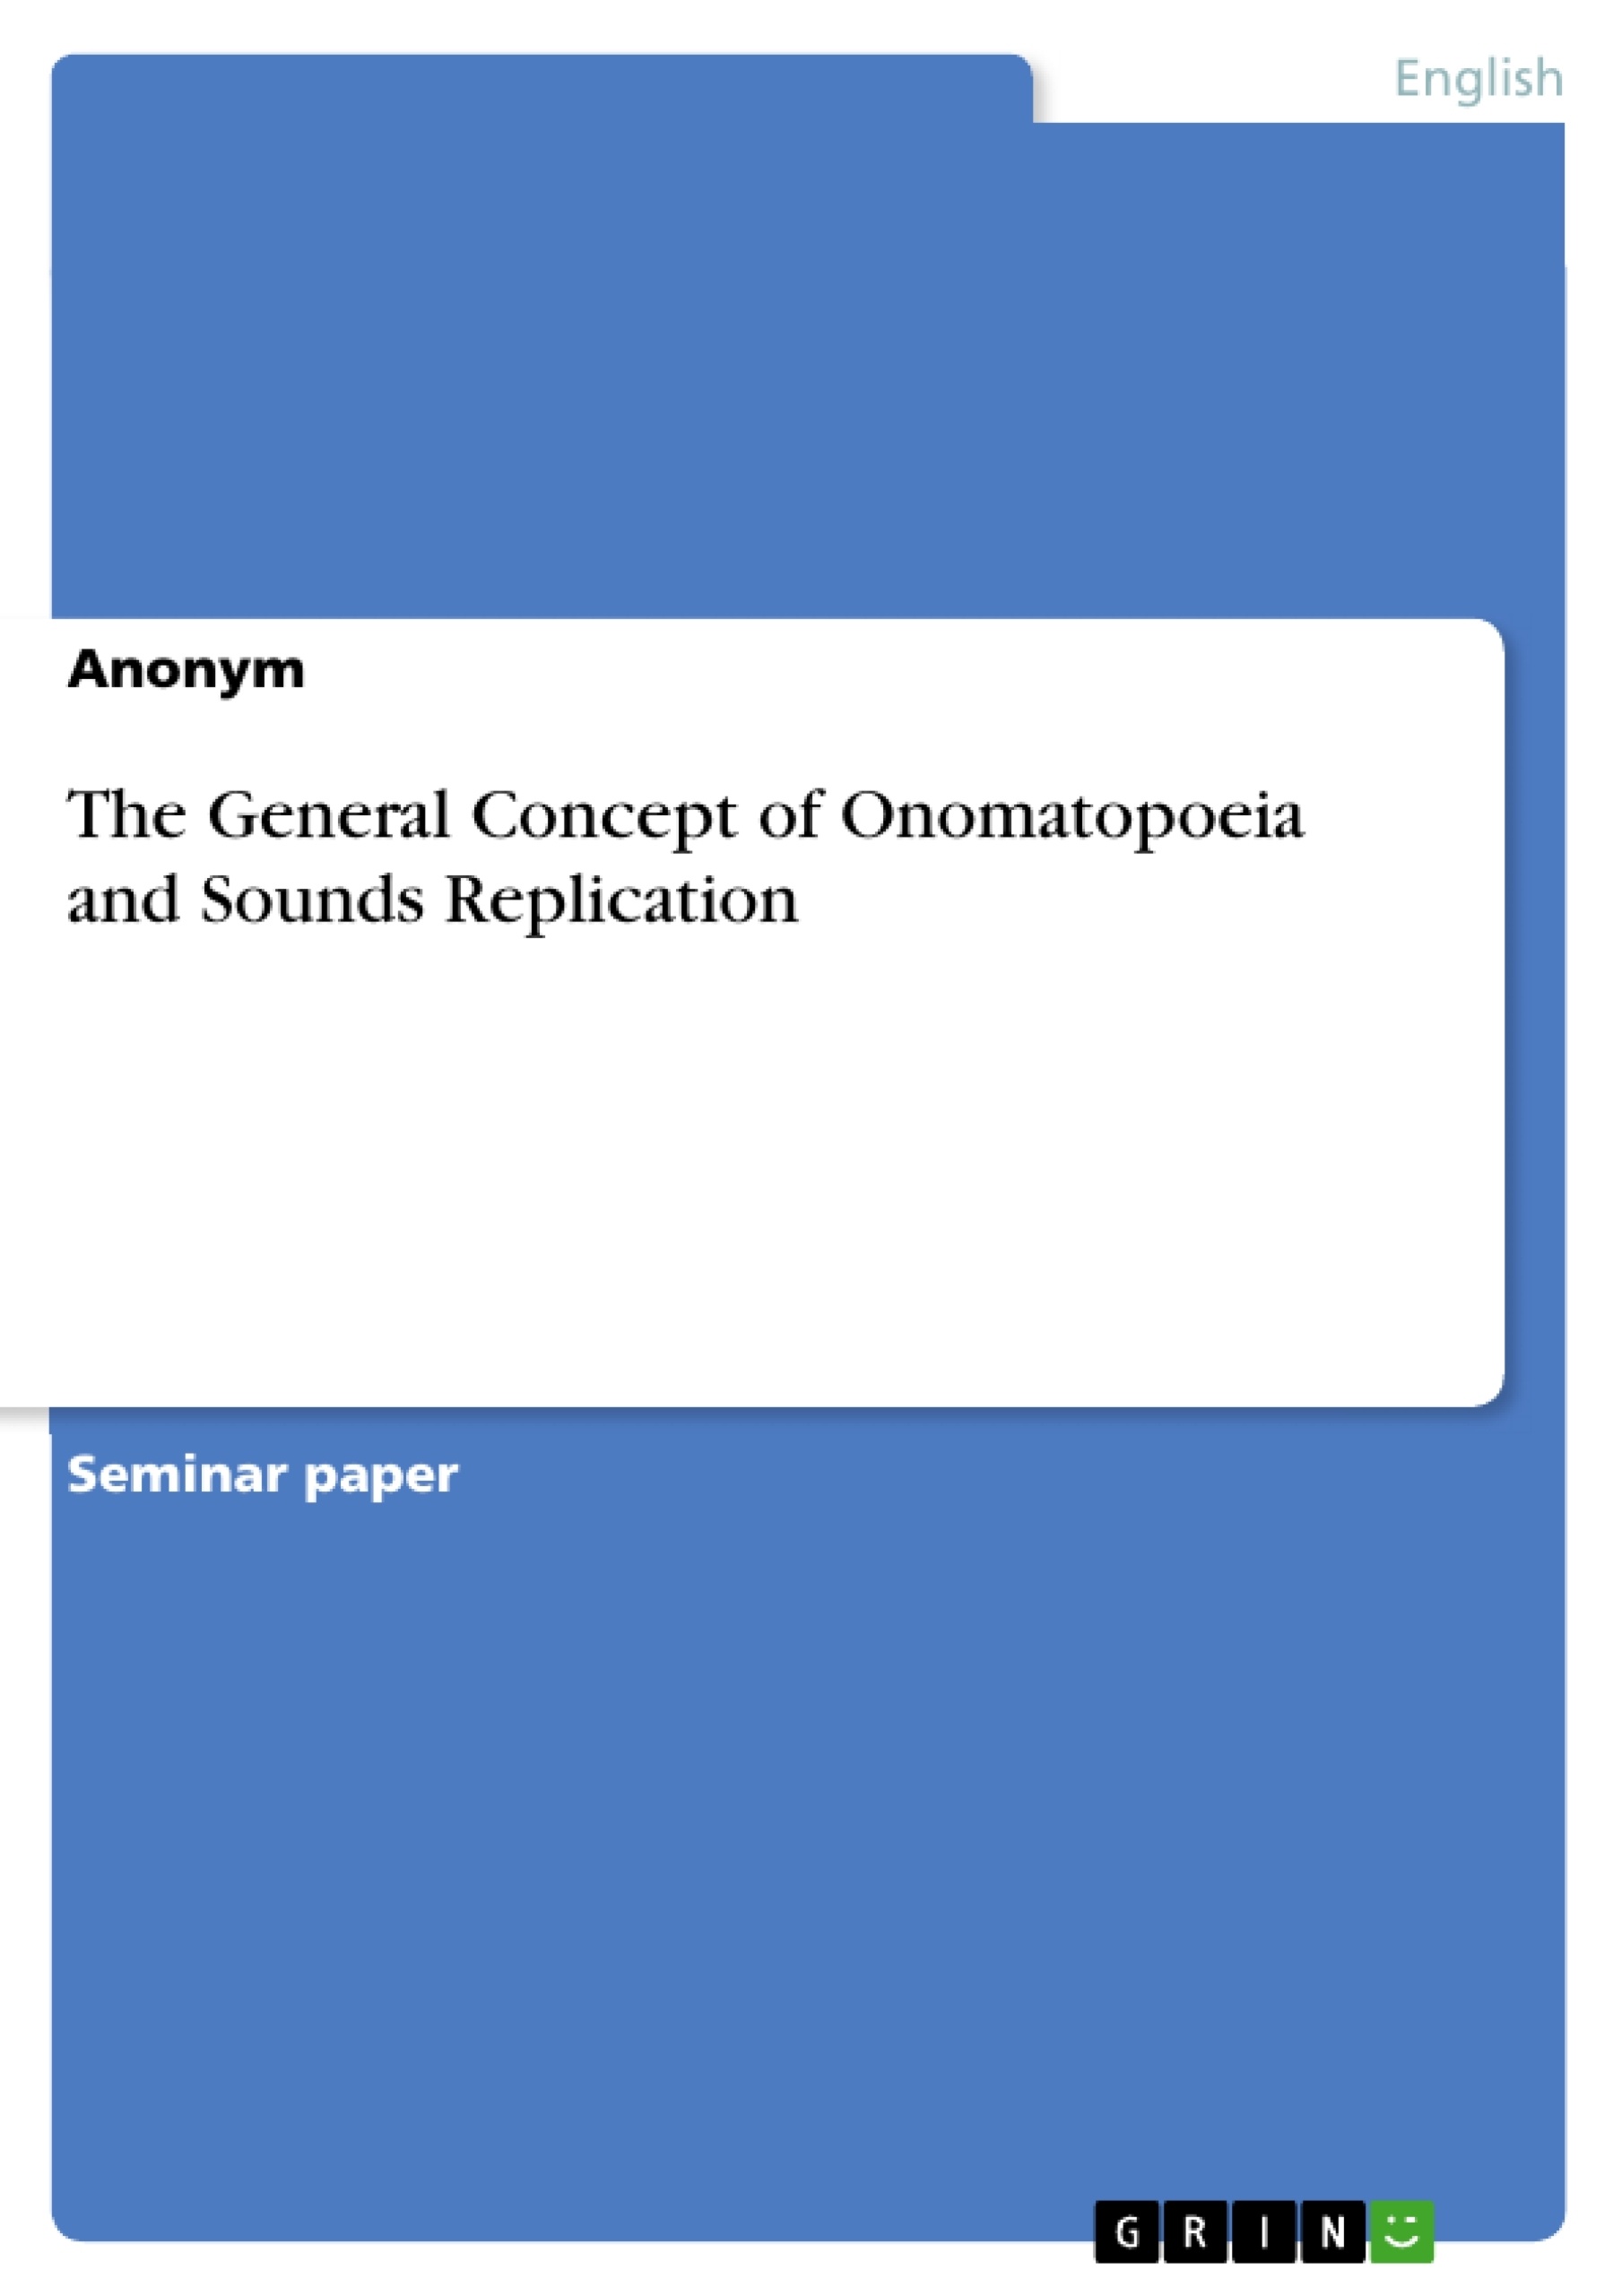 Title: The General Concept of Onomatopoeia and Sounds Replication